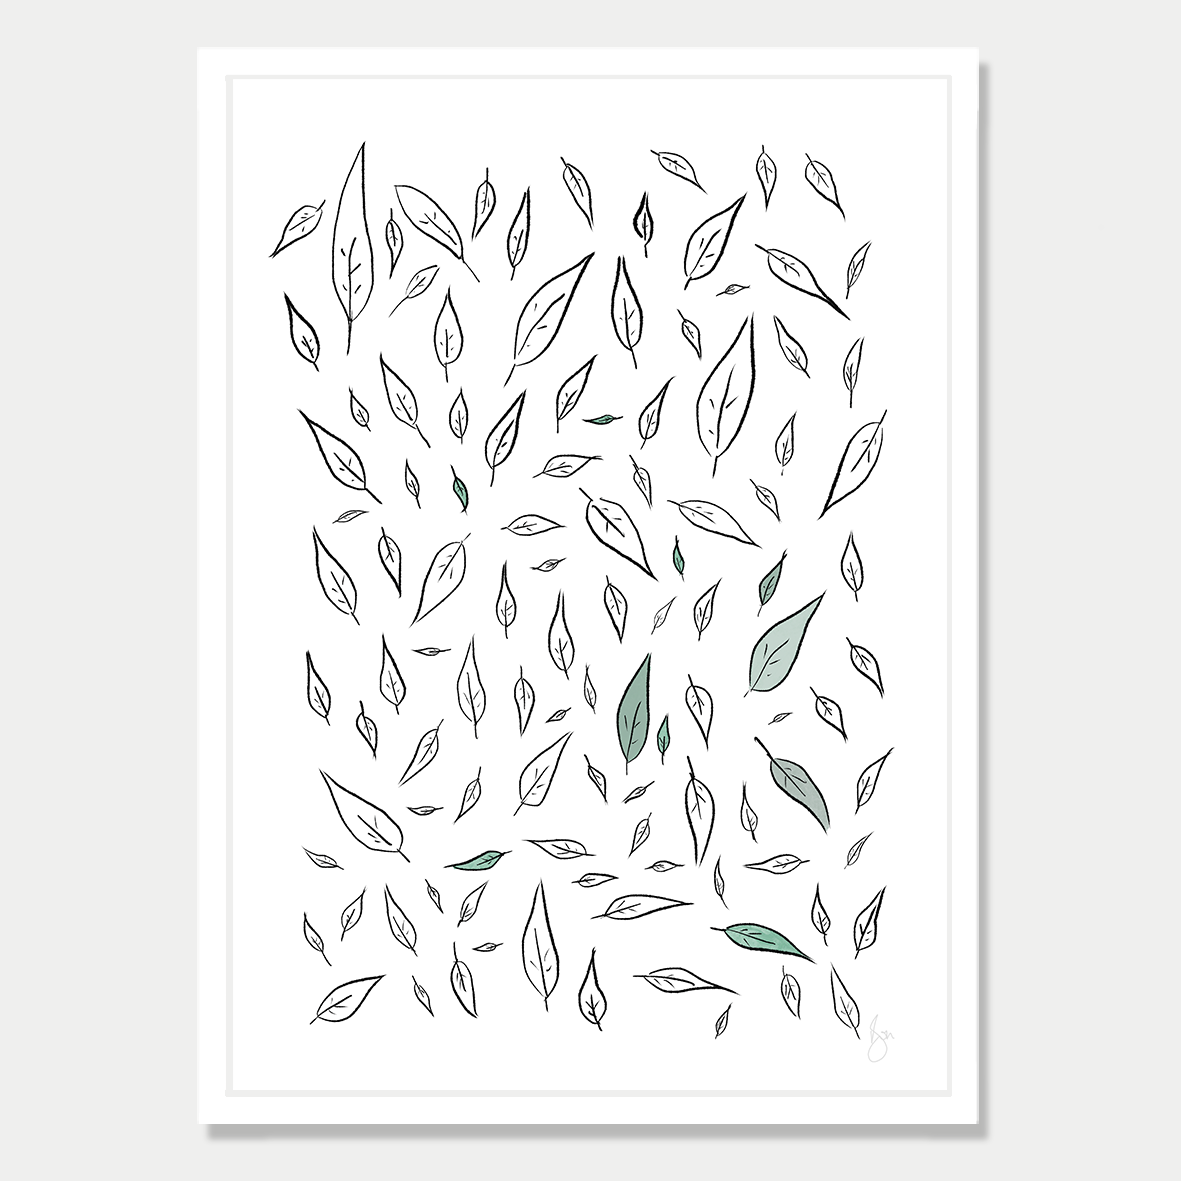 This art print is a playful minimal illustration of leaves, by Bon Jung. Printed in New Zealand by endemicworld and framed in white.